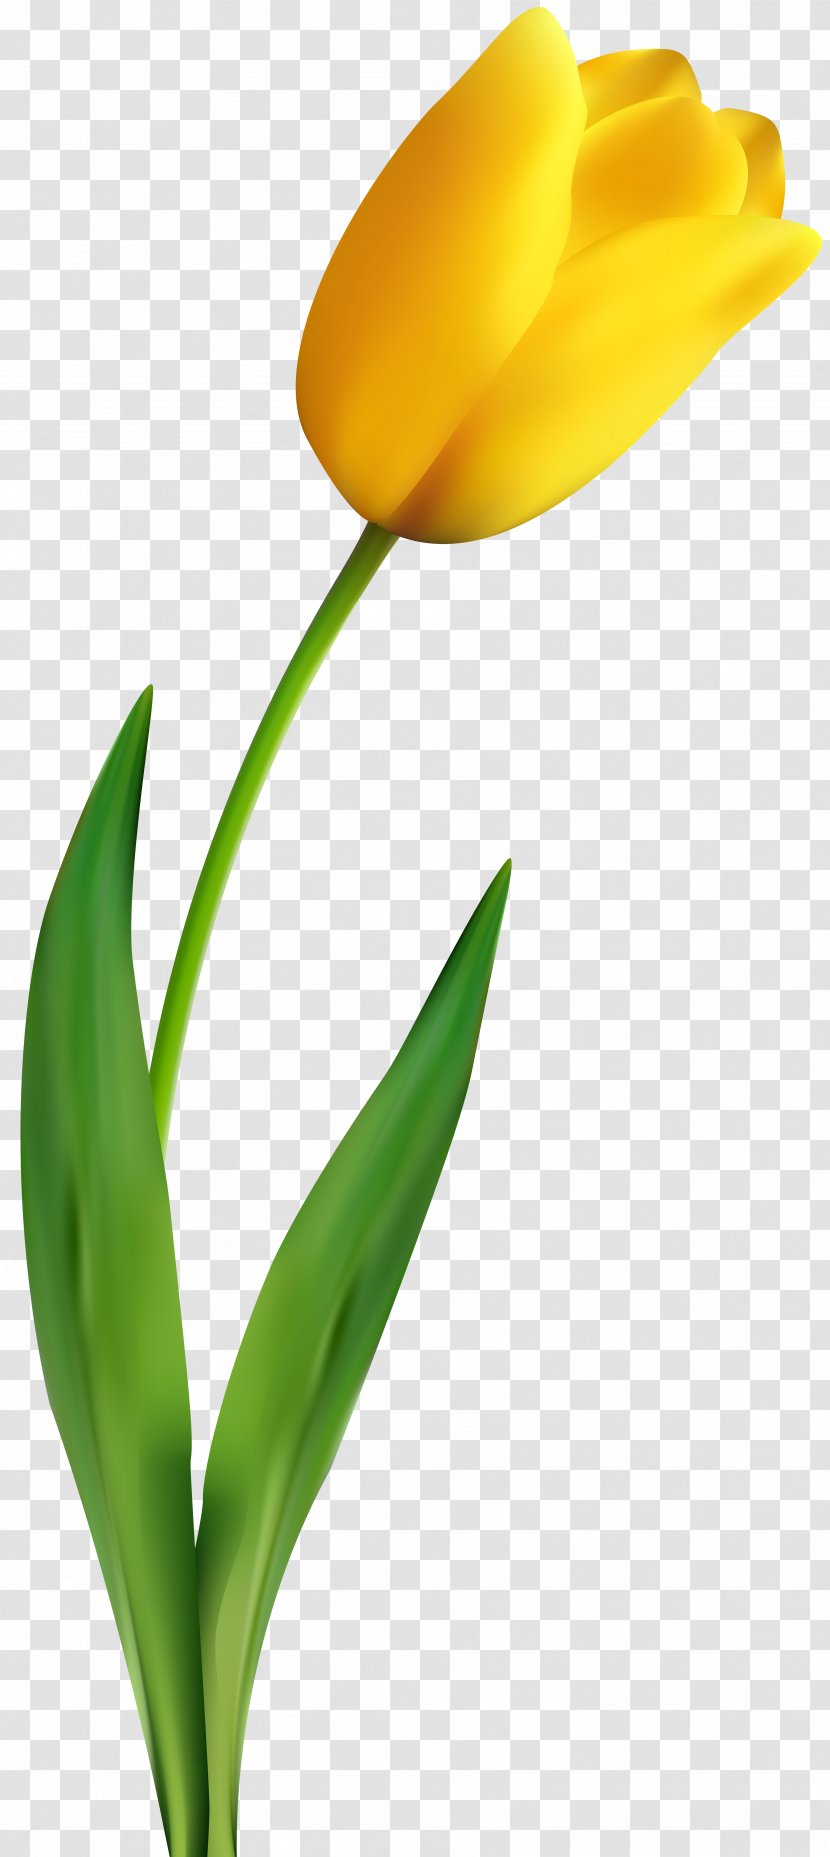 Tulip Flower Yellow Clip Art - White - Material Transparent PNG